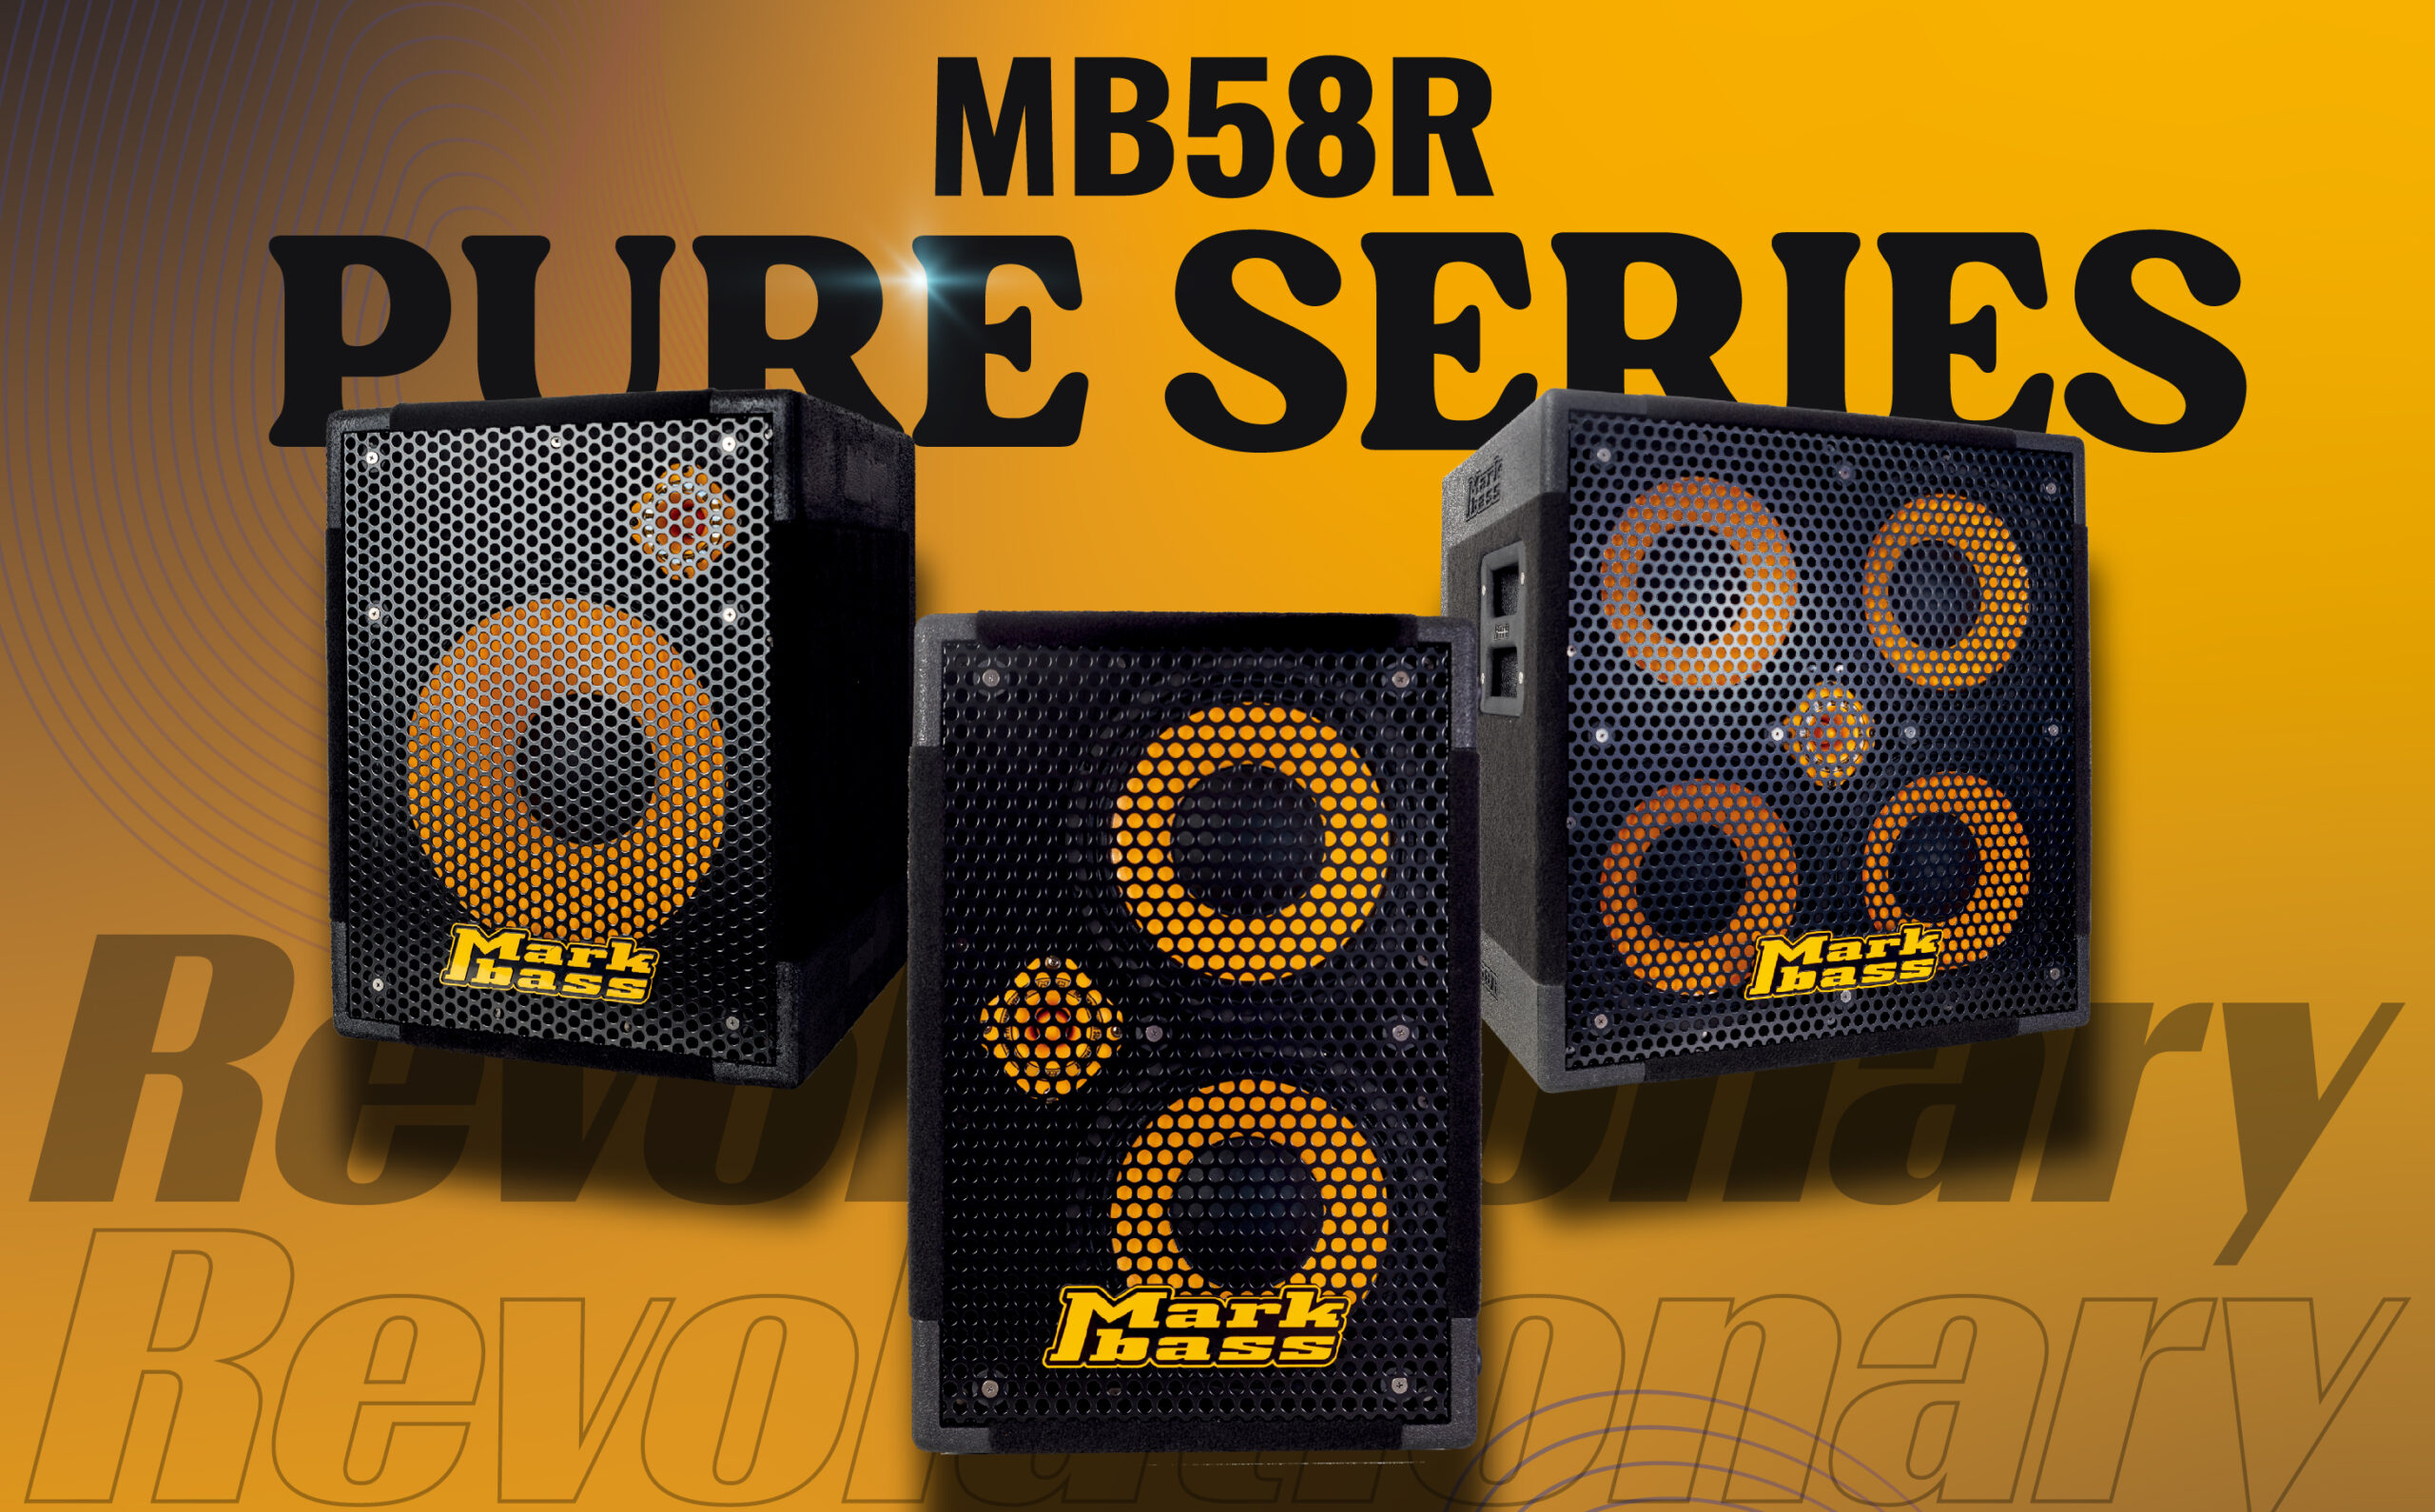 MB58R PURE SERIES